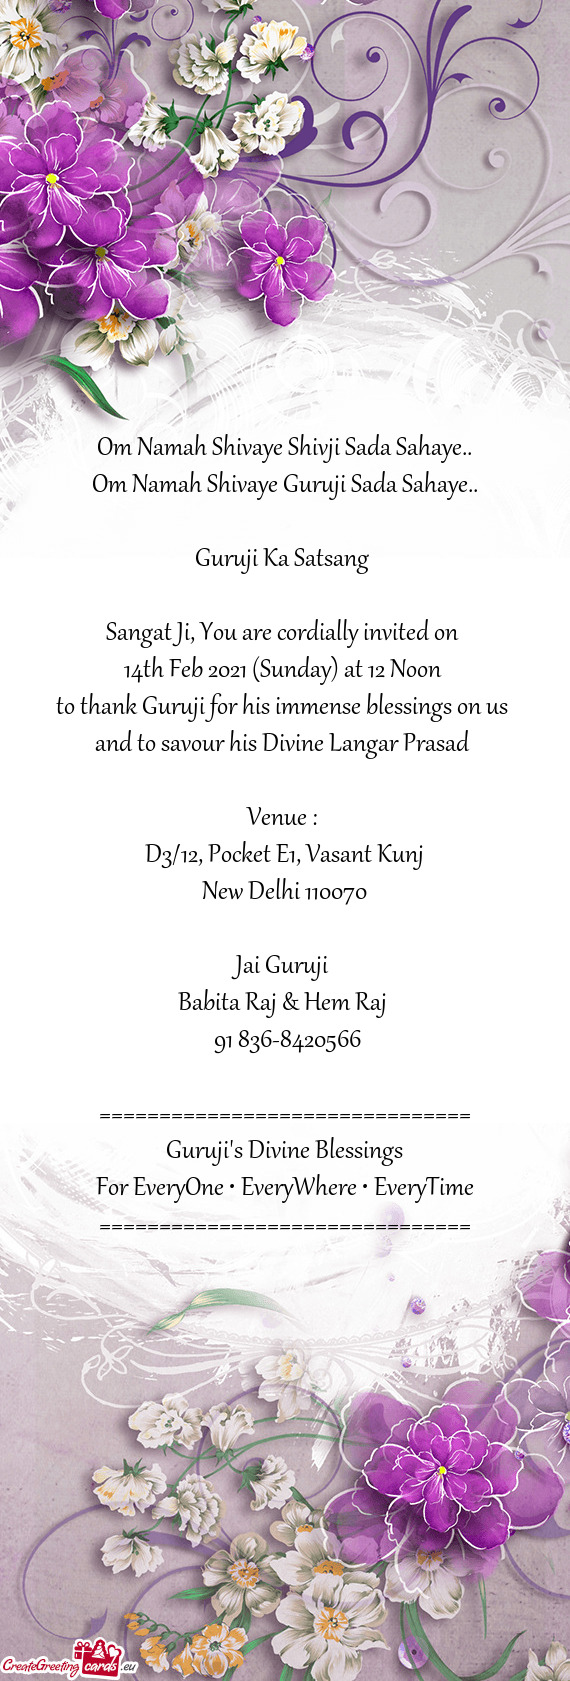 Sangat Ji, You are cordially invited on